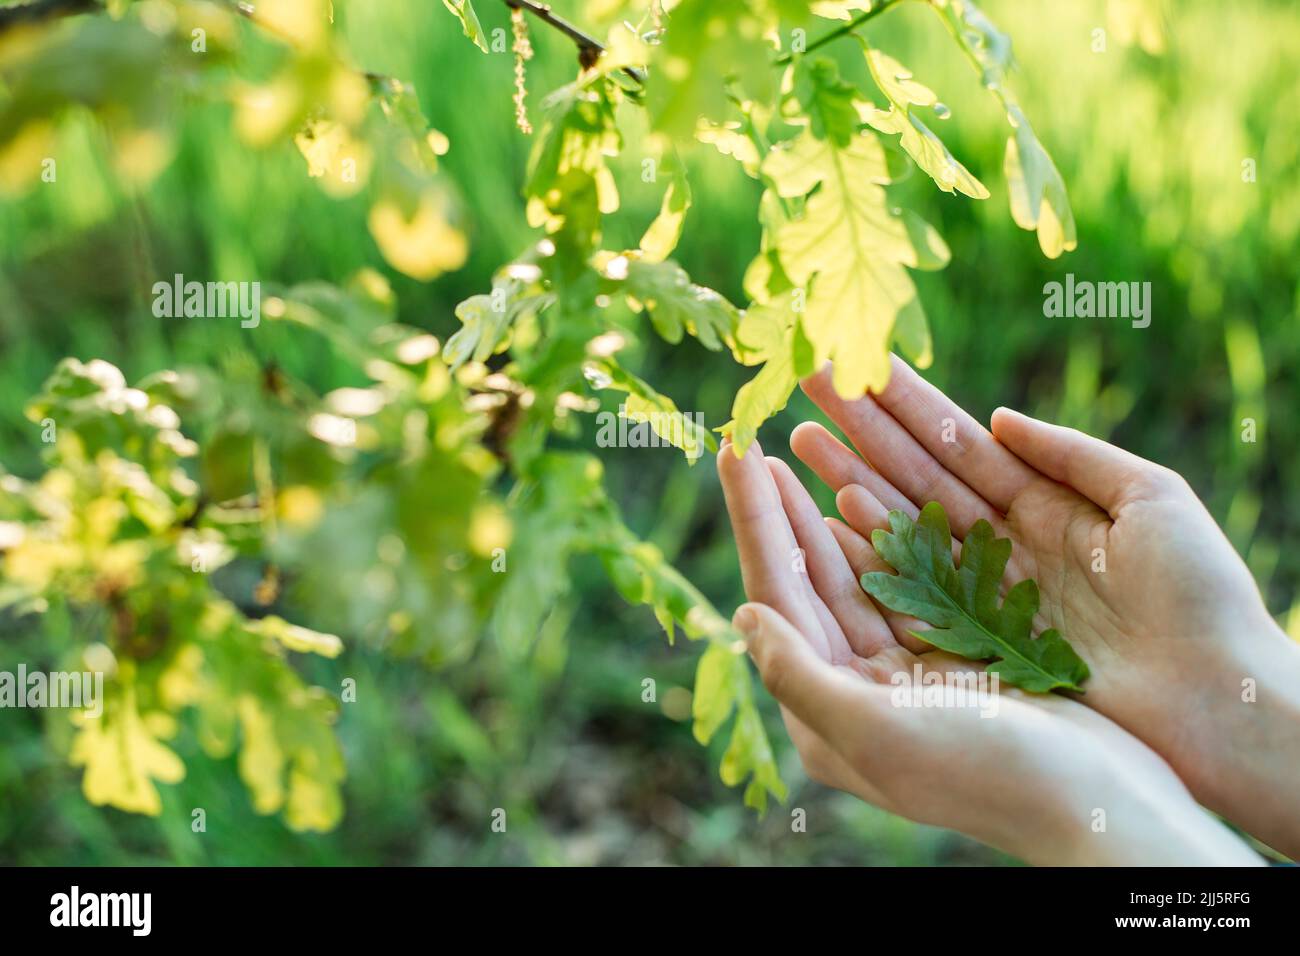 Hands of woman holding oak leaf Stock Photo